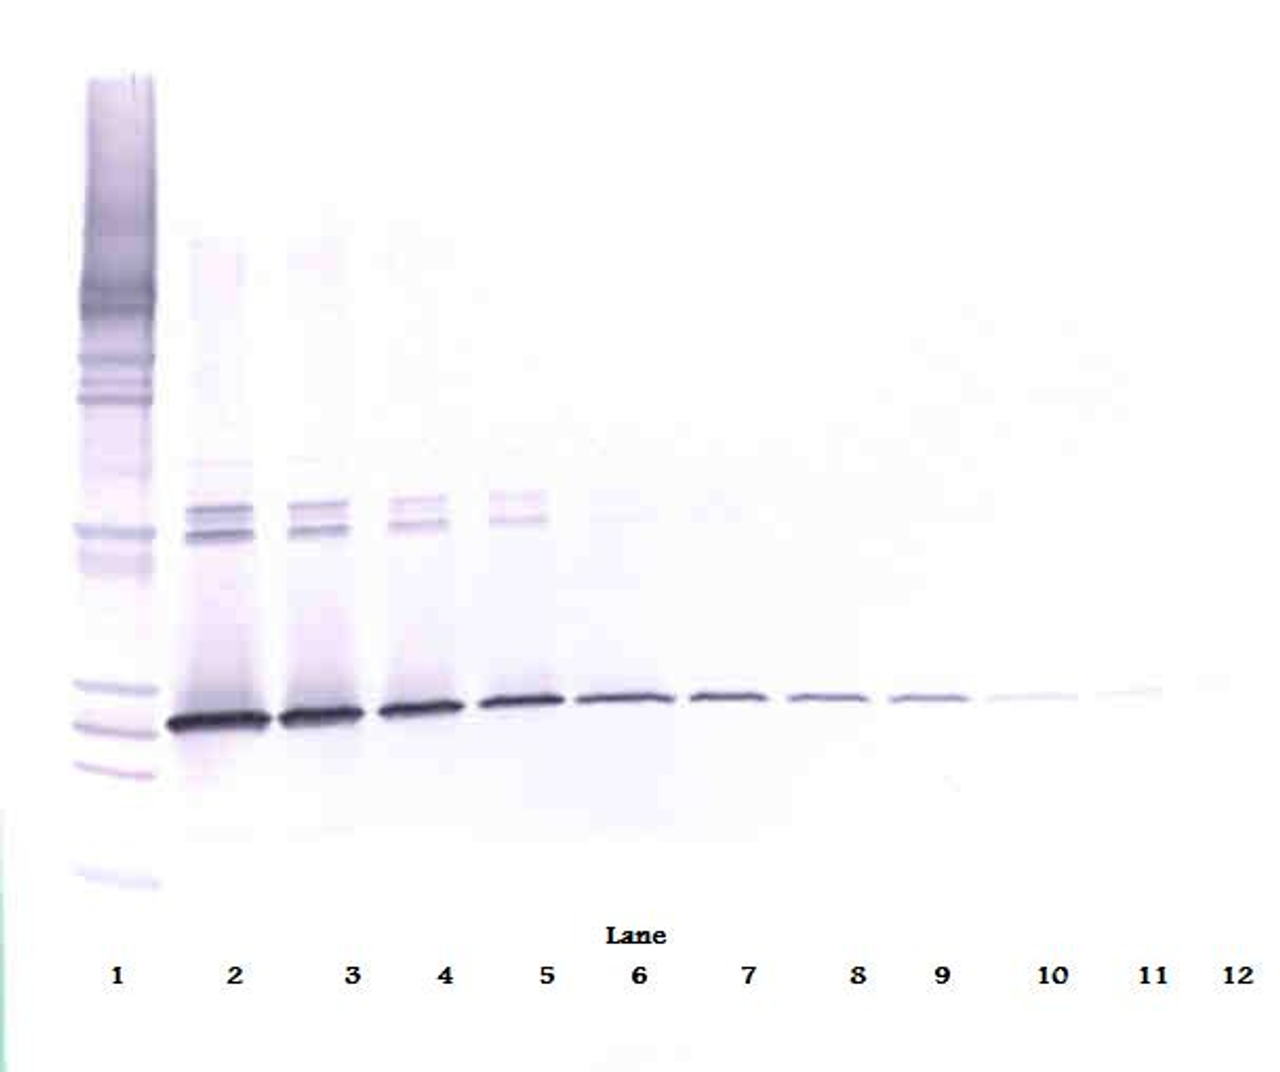 To detect Human IL-5 by Western Blot analysis this antibody can be used at a concentration of 0.1 - 0.2 ug/ml. When used in conjunction with compatible secondary reagents, the detection limit for recombinant Human IL-5 is 1.5 - 3.0 ng/lane, under either reducing or non-reducing conditions.